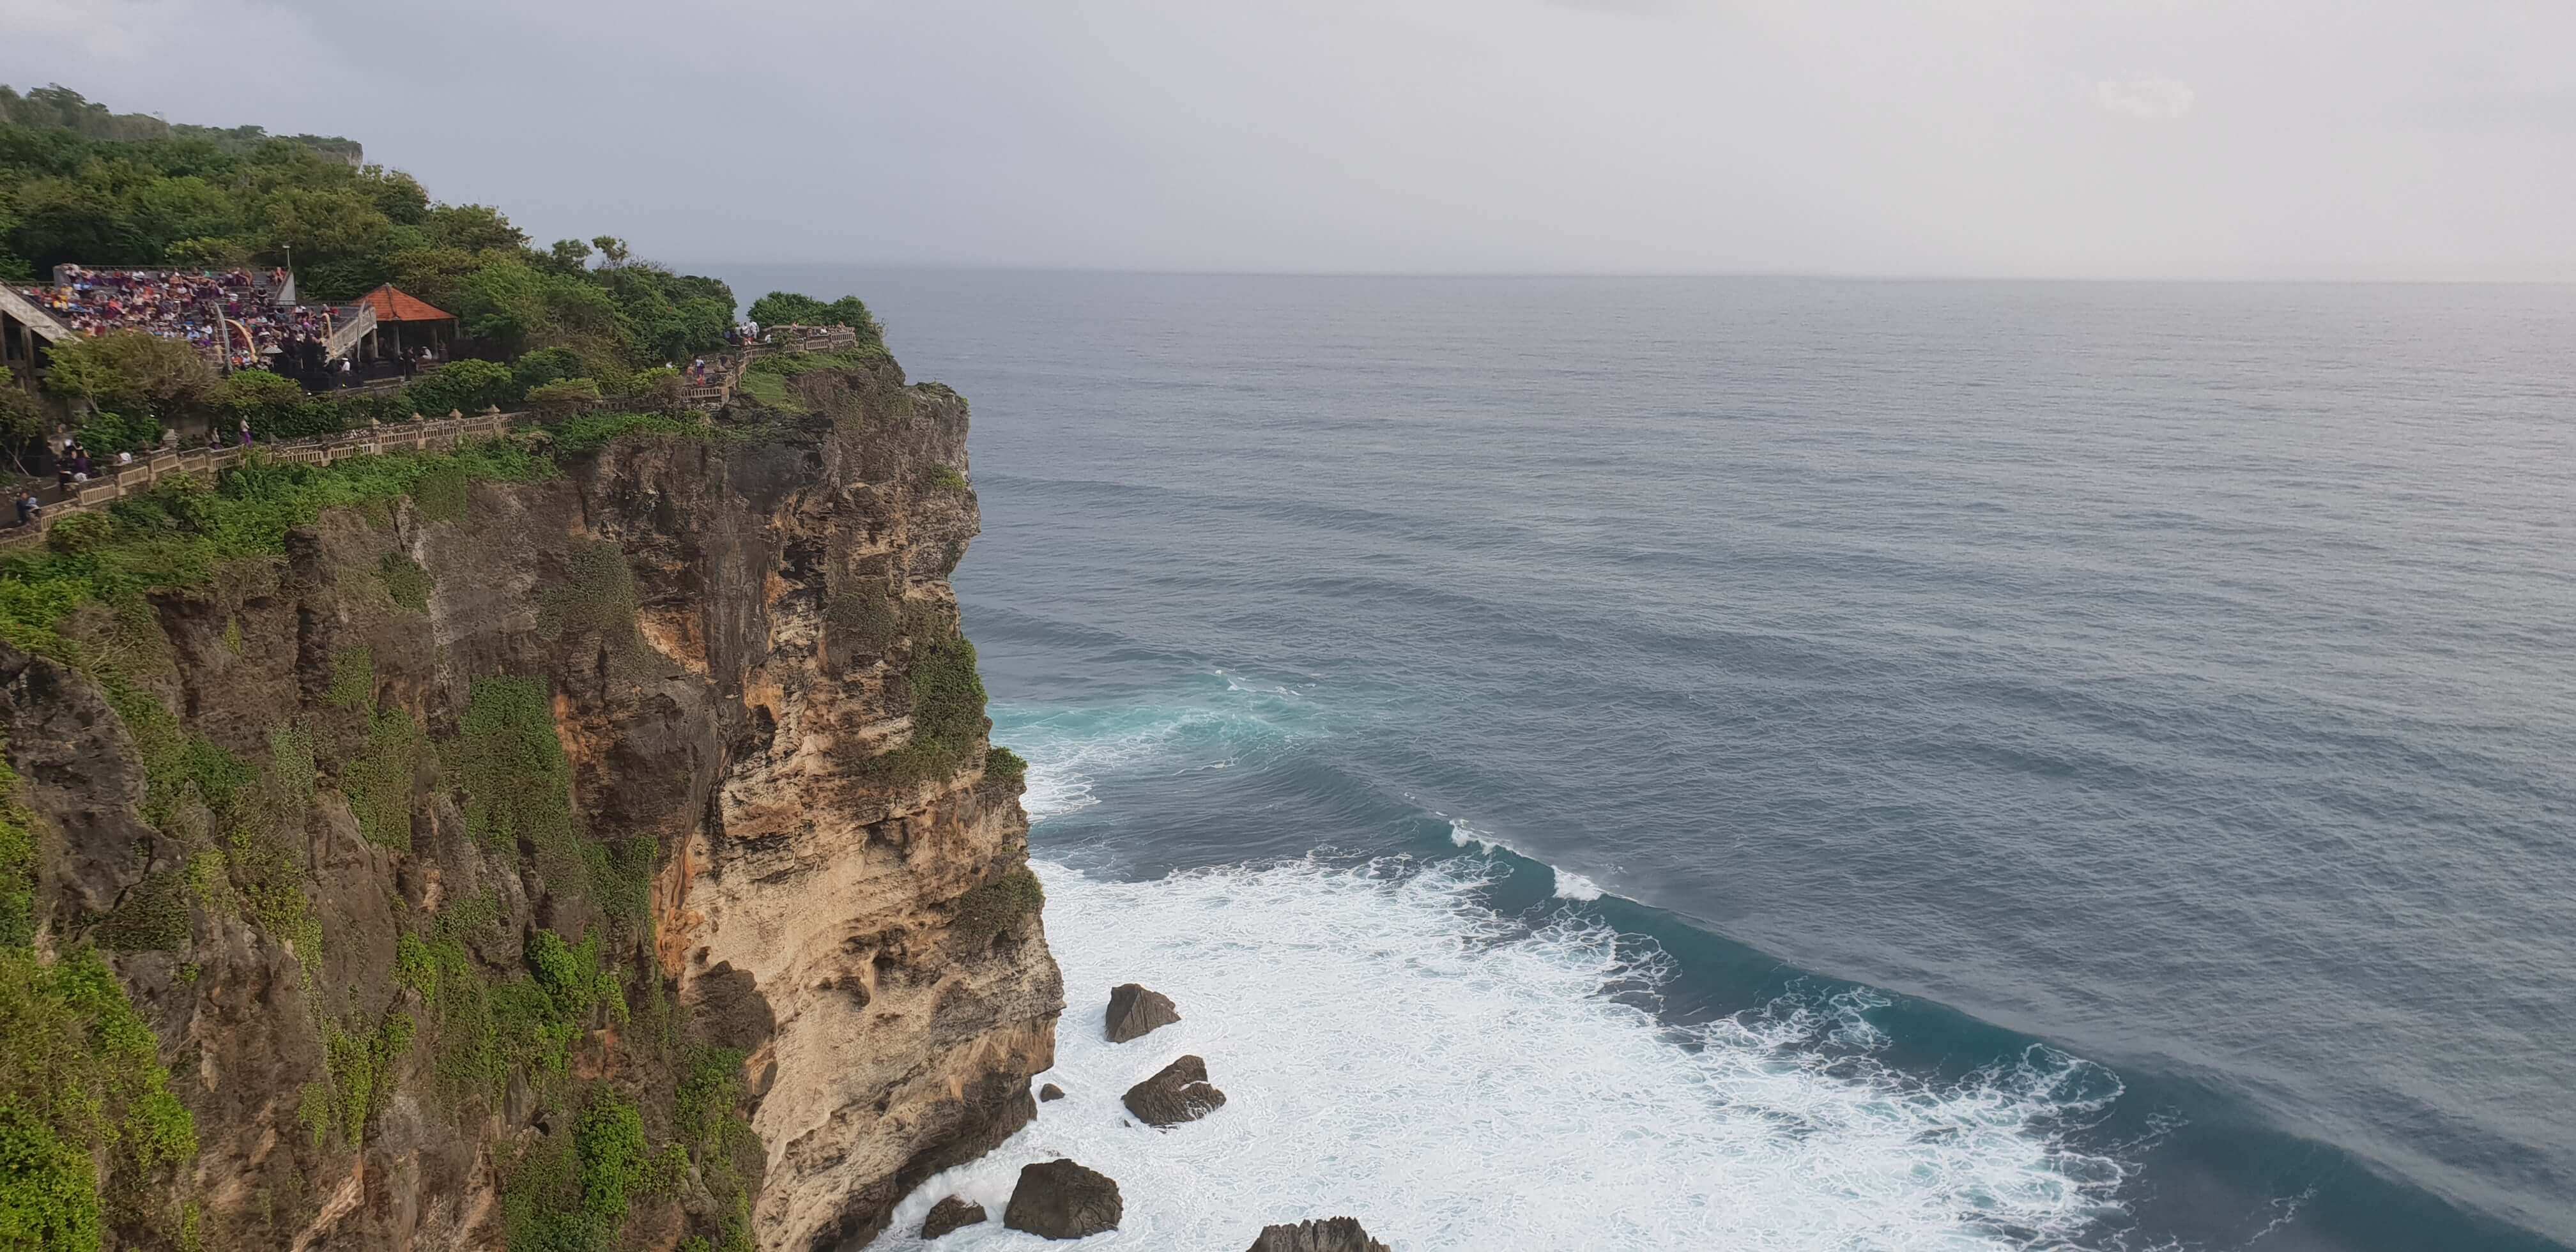 A place you have to do in Uluwatu is the Uluwatu temple where you get the view of the Uluwatu cliff